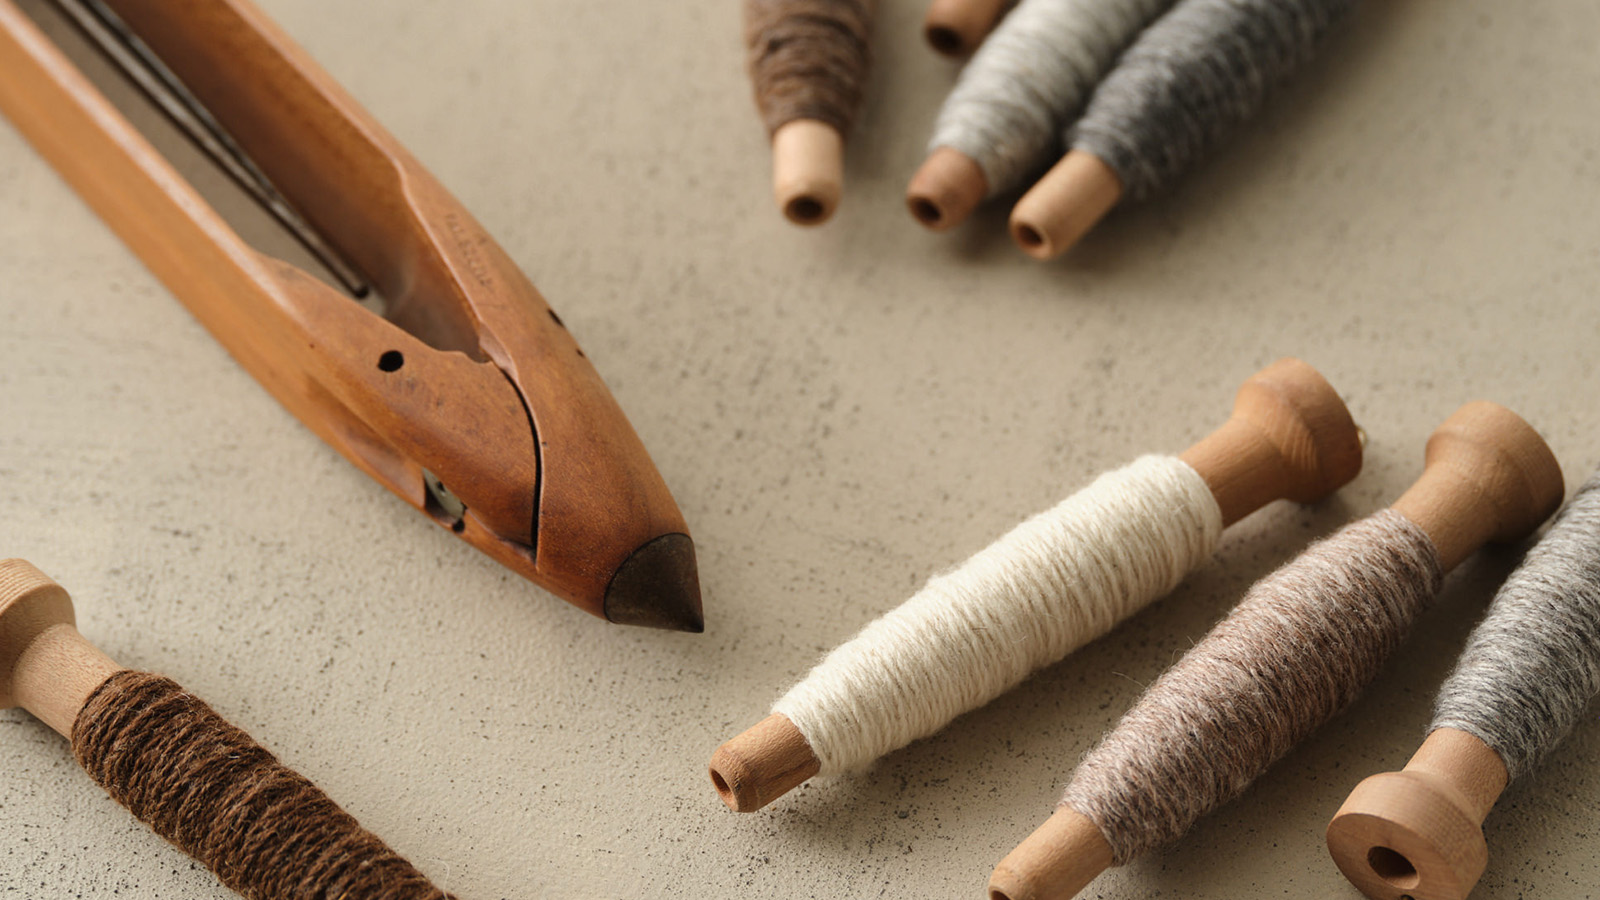 Spools of yarn and tools used in wool craft lay on a table in neutral tones of wood, grey and oatmeal